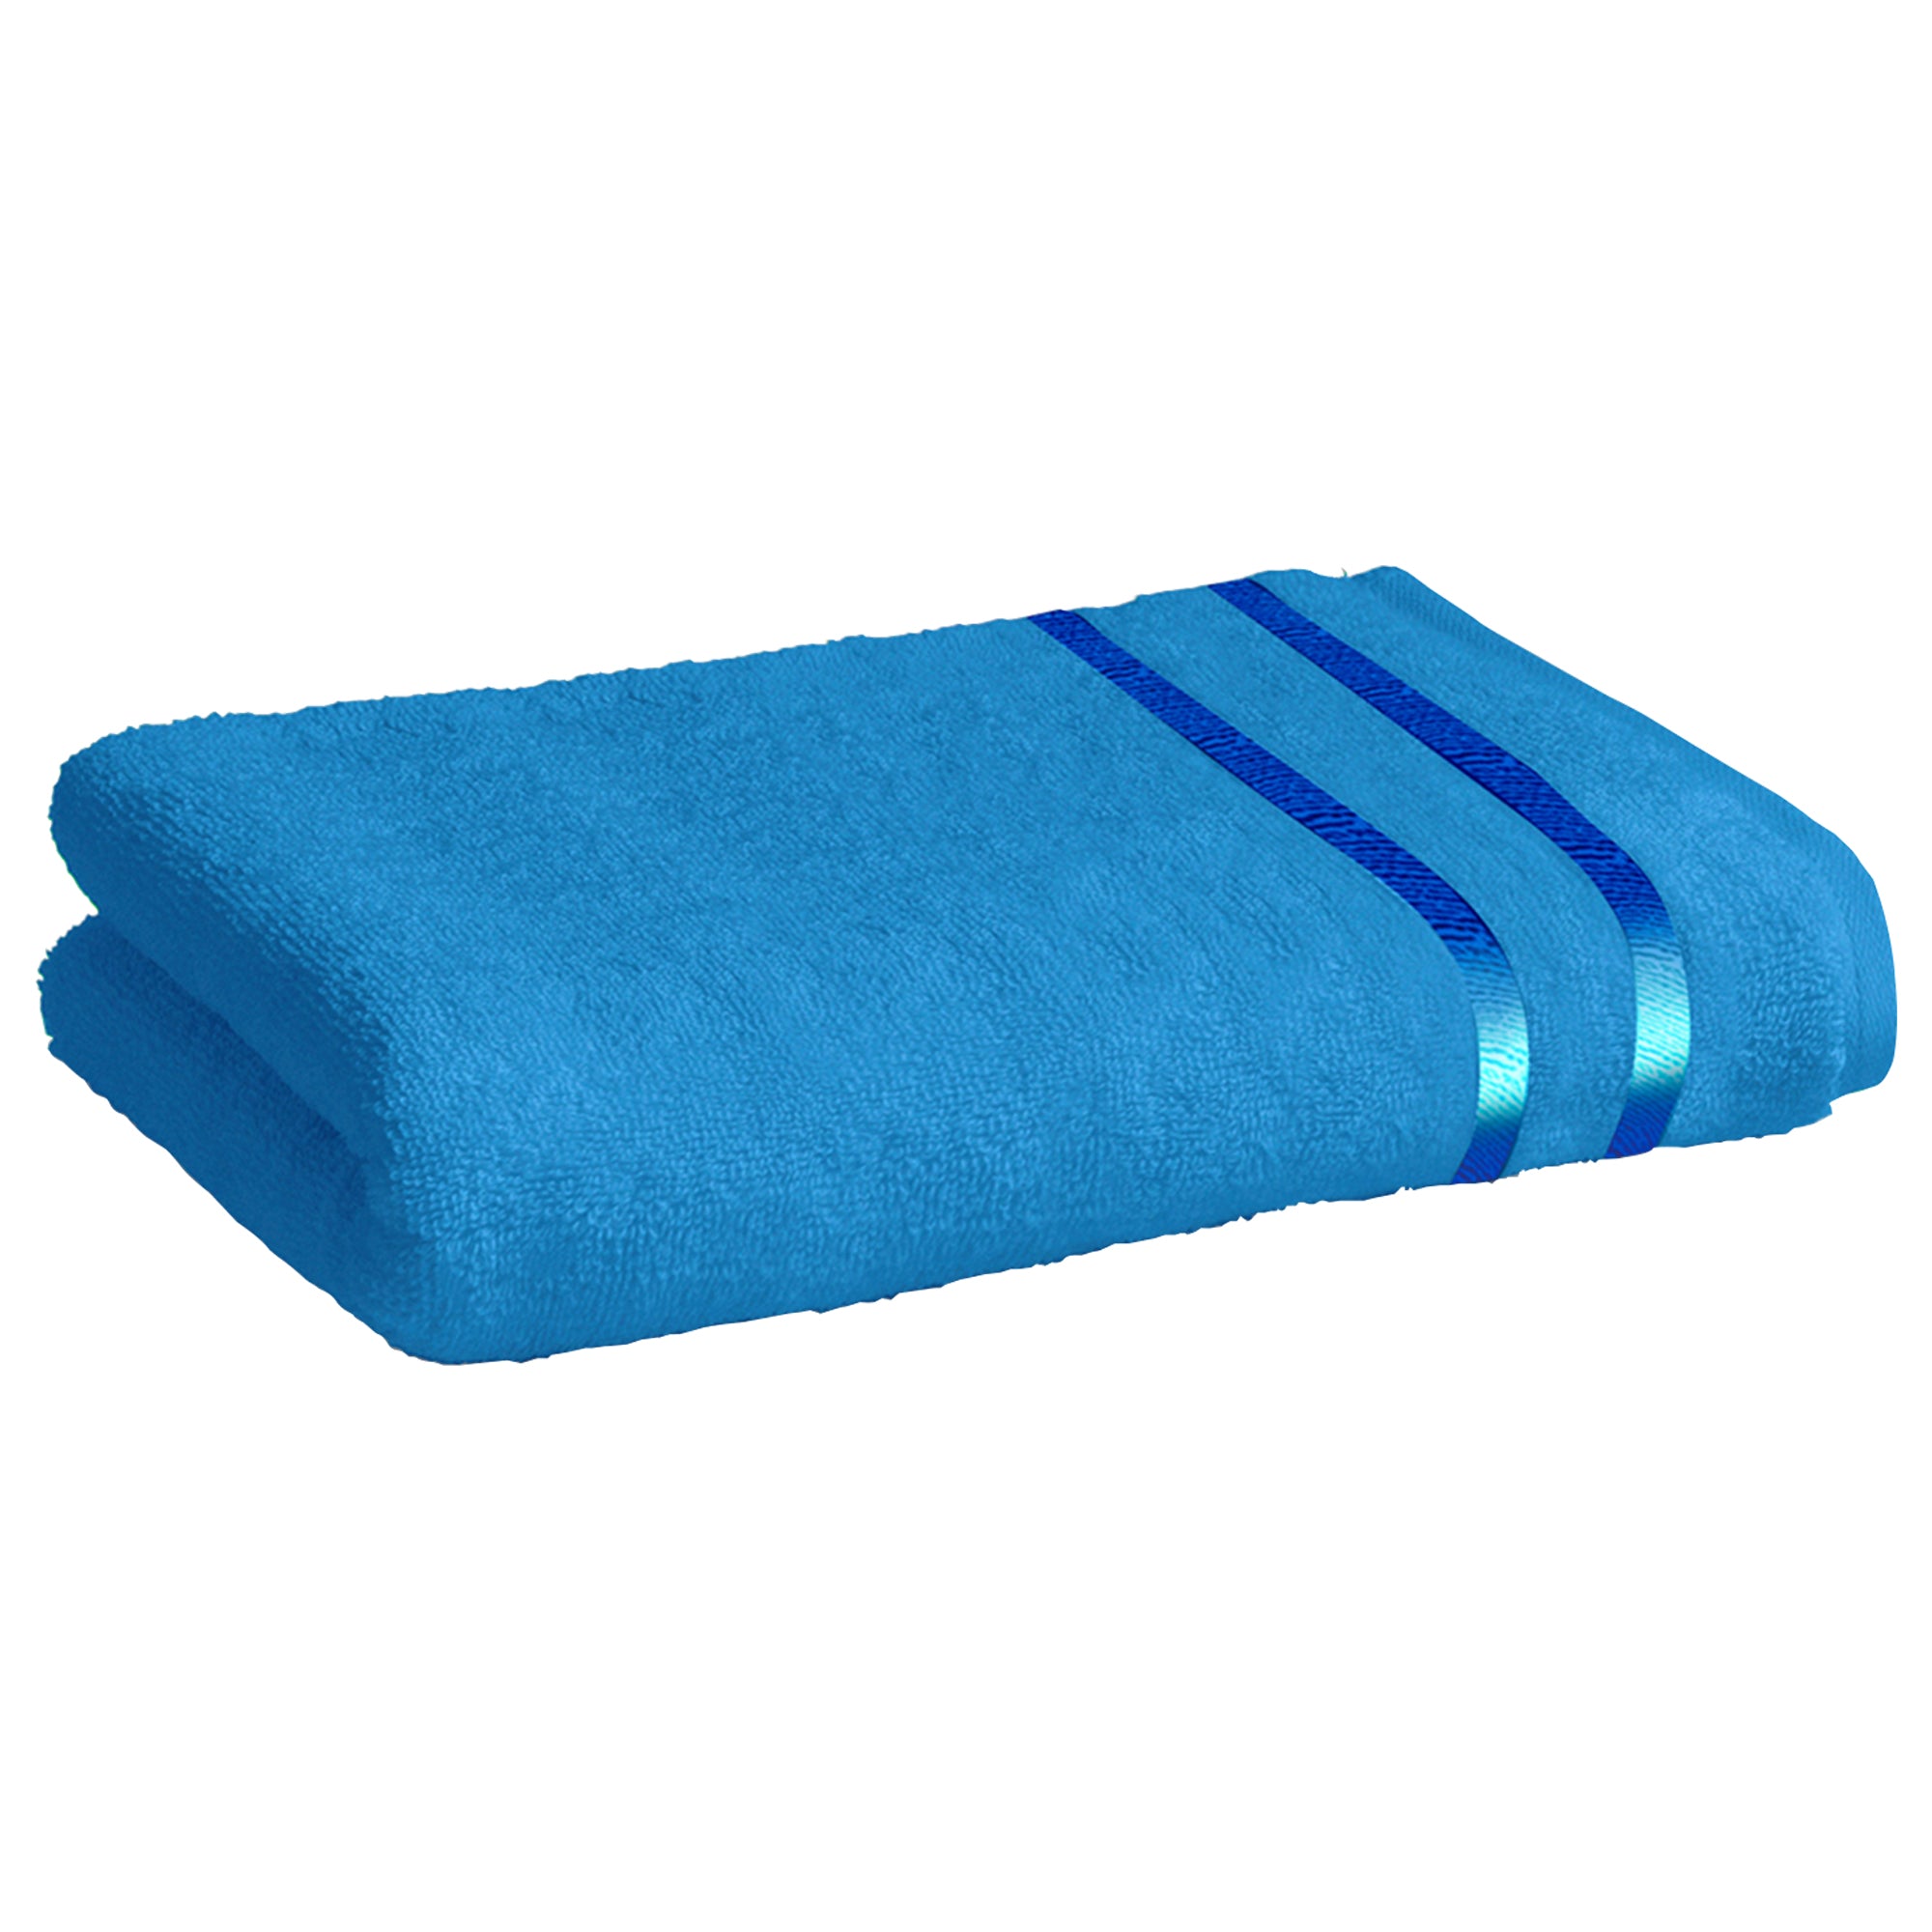 Story@Home 2 Units 100% Cotton Bath Towels - Navy Blue and Blue